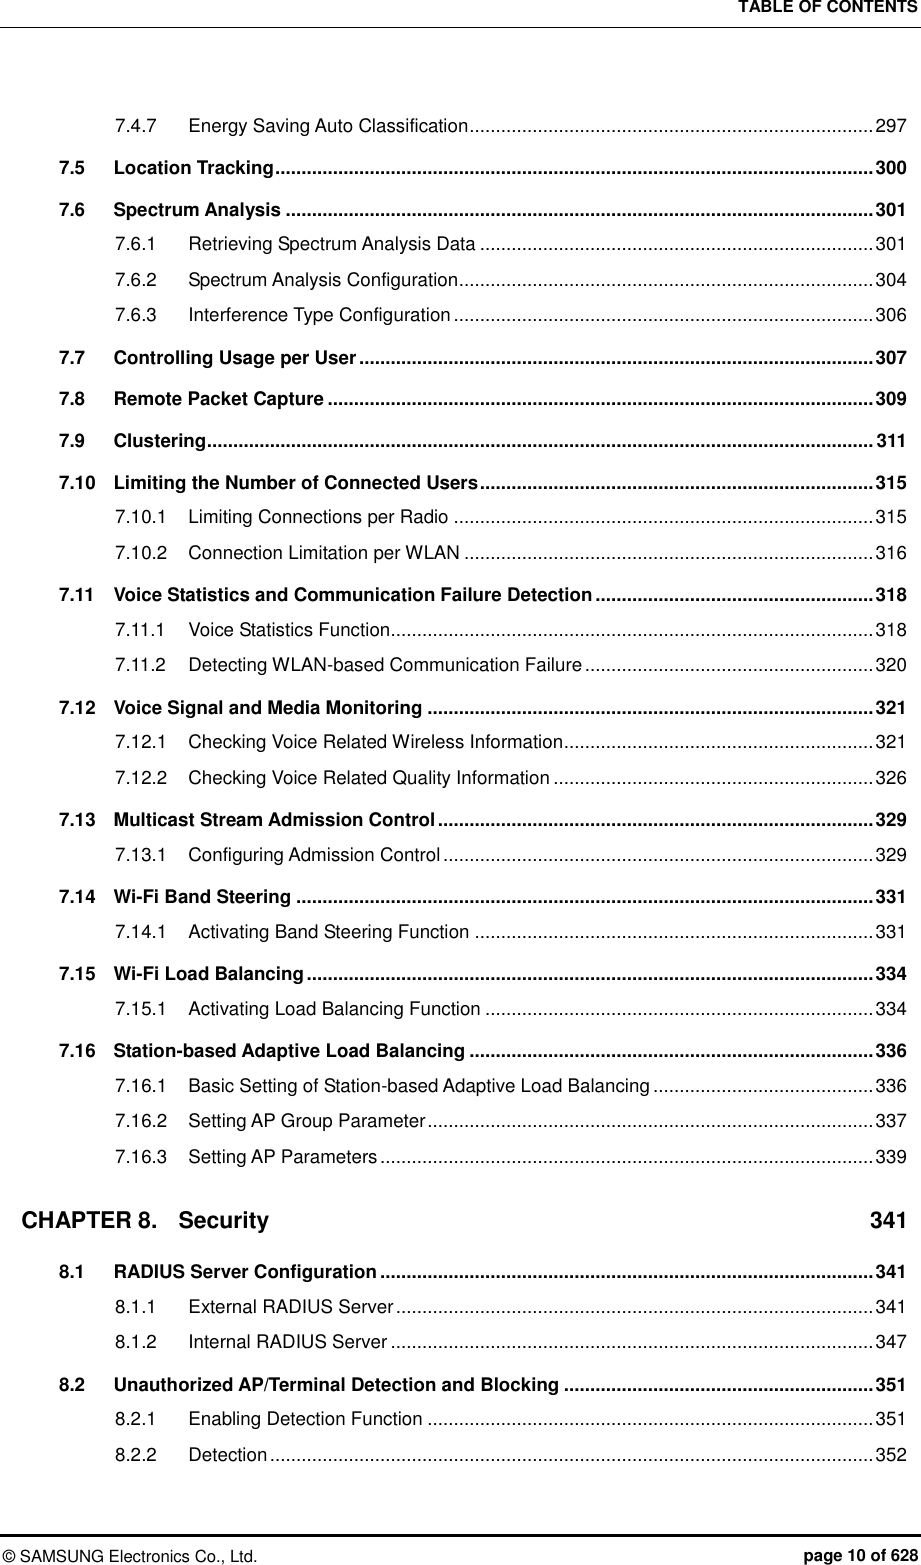 TABLE OF CONTENTS ©  SAMSUNG Electronics Co., Ltd.  page 10 of 628 7.4.7 Energy Saving Auto Classification ............................................................................. 297 7.5 Location Tracking .................................................................................................................. 300 7.6 Spectrum Analysis ................................................................................................................ 301 7.6.1 Retrieving Spectrum Analysis Data ........................................................................... 301 7.6.2 Spectrum Analysis Configuration ............................................................................... 304 7.6.3 Interference Type Configuration ................................................................................ 306 7.7 Controlling Usage per User .................................................................................................. 307 7.8 Remote Packet Capture ........................................................................................................ 309 7.9 Clustering ............................................................................................................................... 311 7.10 Limiting the Number of Connected Users ........................................................................... 315 7.10.1 Limiting Connections per Radio ................................................................................ 315 7.10.2 Connection Limitation per WLAN .............................................................................. 316 7.11 Voice Statistics and Communication Failure Detection ..................................................... 318 7.11.1 Voice Statistics Function ............................................................................................ 318 7.11.2 Detecting WLAN-based Communication Failure ....................................................... 320 7.12 Voice Signal and Media Monitoring ..................................................................................... 321 7.12.1 Checking Voice Related Wireless Information ........................................................... 321 7.12.2 Checking Voice Related Quality Information ............................................................. 326 7.13 Multicast Stream Admission Control ................................................................................... 329 7.13.1 Configuring Admission Control .................................................................................. 329 7.14 Wi-Fi Band Steering .............................................................................................................. 331 7.14.1 Activating Band Steering Function ............................................................................ 331 7.15 Wi-Fi Load Balancing ............................................................................................................ 334 7.15.1 Activating Load Balancing Function .......................................................................... 334 7.16 Station-based Adaptive Load Balancing ............................................................................. 336 7.16.1 Basic Setting of Station-based Adaptive Load Balancing .......................................... 336 7.16.2 Setting AP Group Parameter ..................................................................................... 337 7.16.3 Setting AP Parameters .............................................................................................. 339 CHAPTER 8. Security  341 8.1 RADIUS Server Configuration .............................................................................................. 341 8.1.1 External RADIUS Server ........................................................................................... 341 8.1.2 Internal RADIUS Server ............................................................................................ 347 8.2 Unauthorized AP/Terminal Detection and Blocking ........................................................... 351 8.2.1 Enabling Detection Function ..................................................................................... 351 8.2.2 Detection ................................................................................................................... 352 